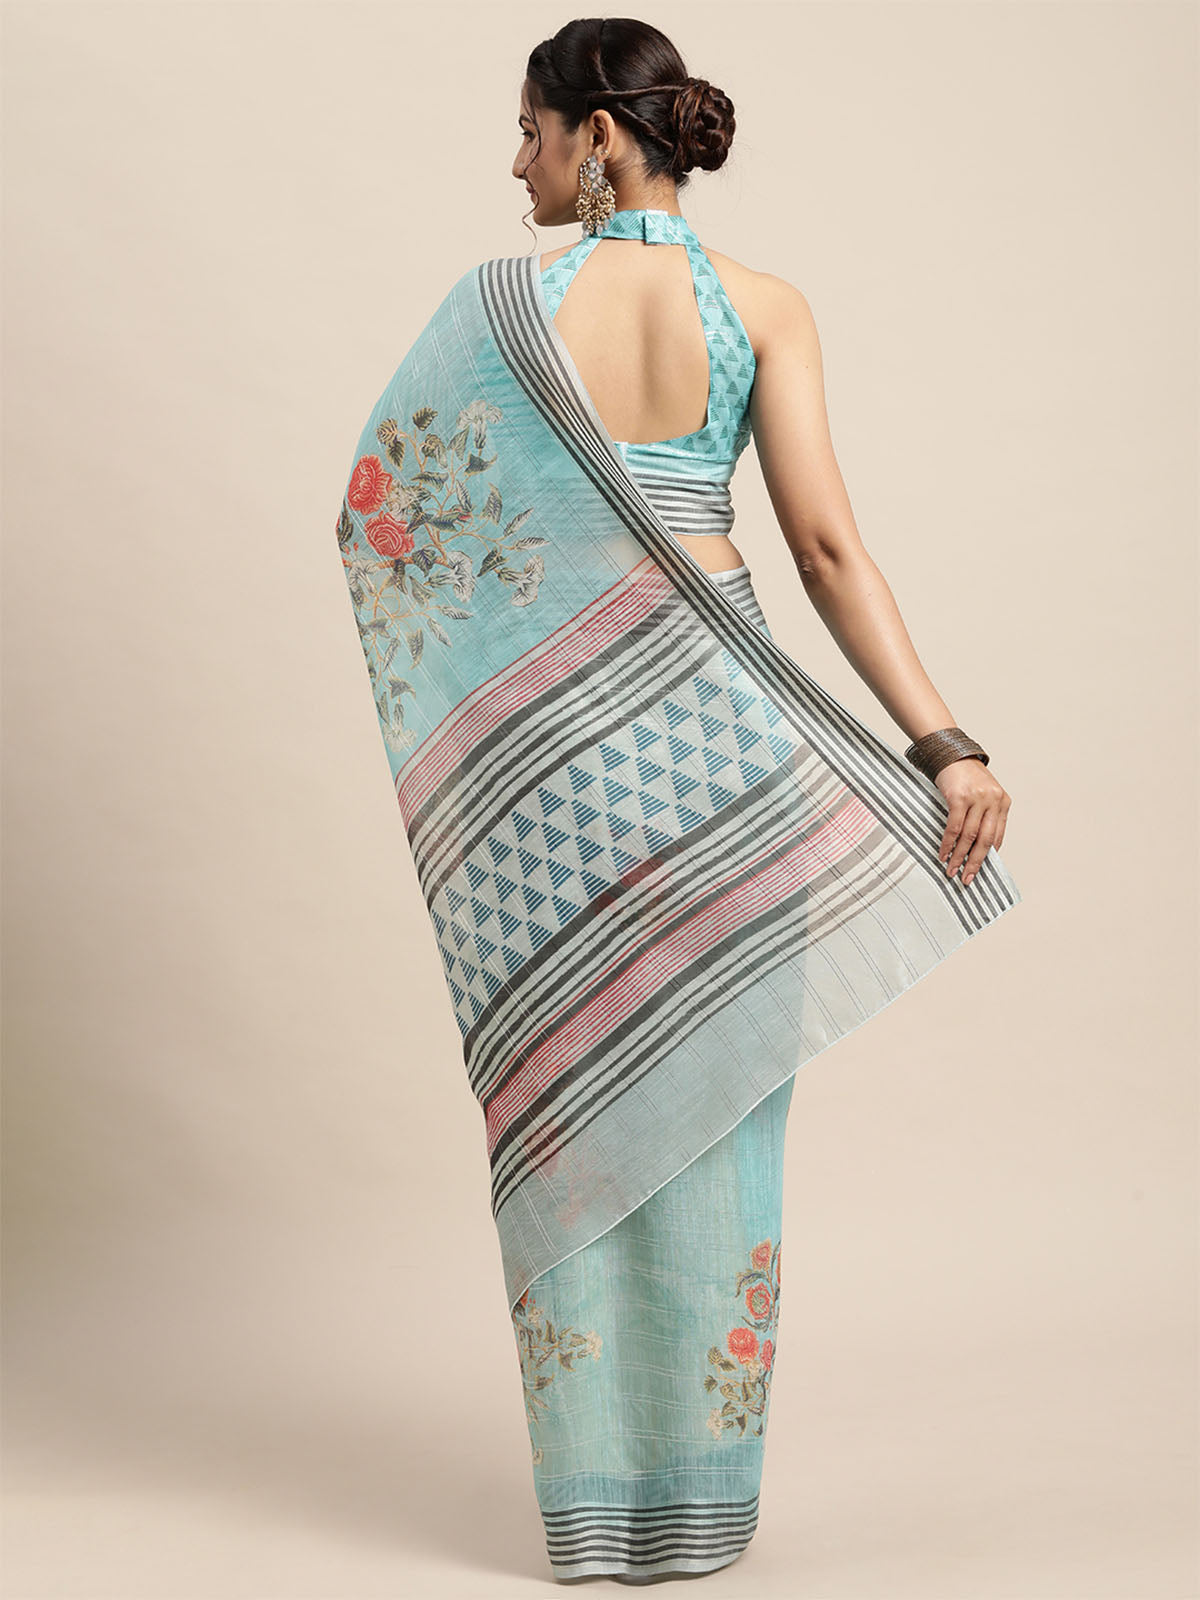 Women'S Soft Silk Sea Green Printed Saree With Unstitched Blouse